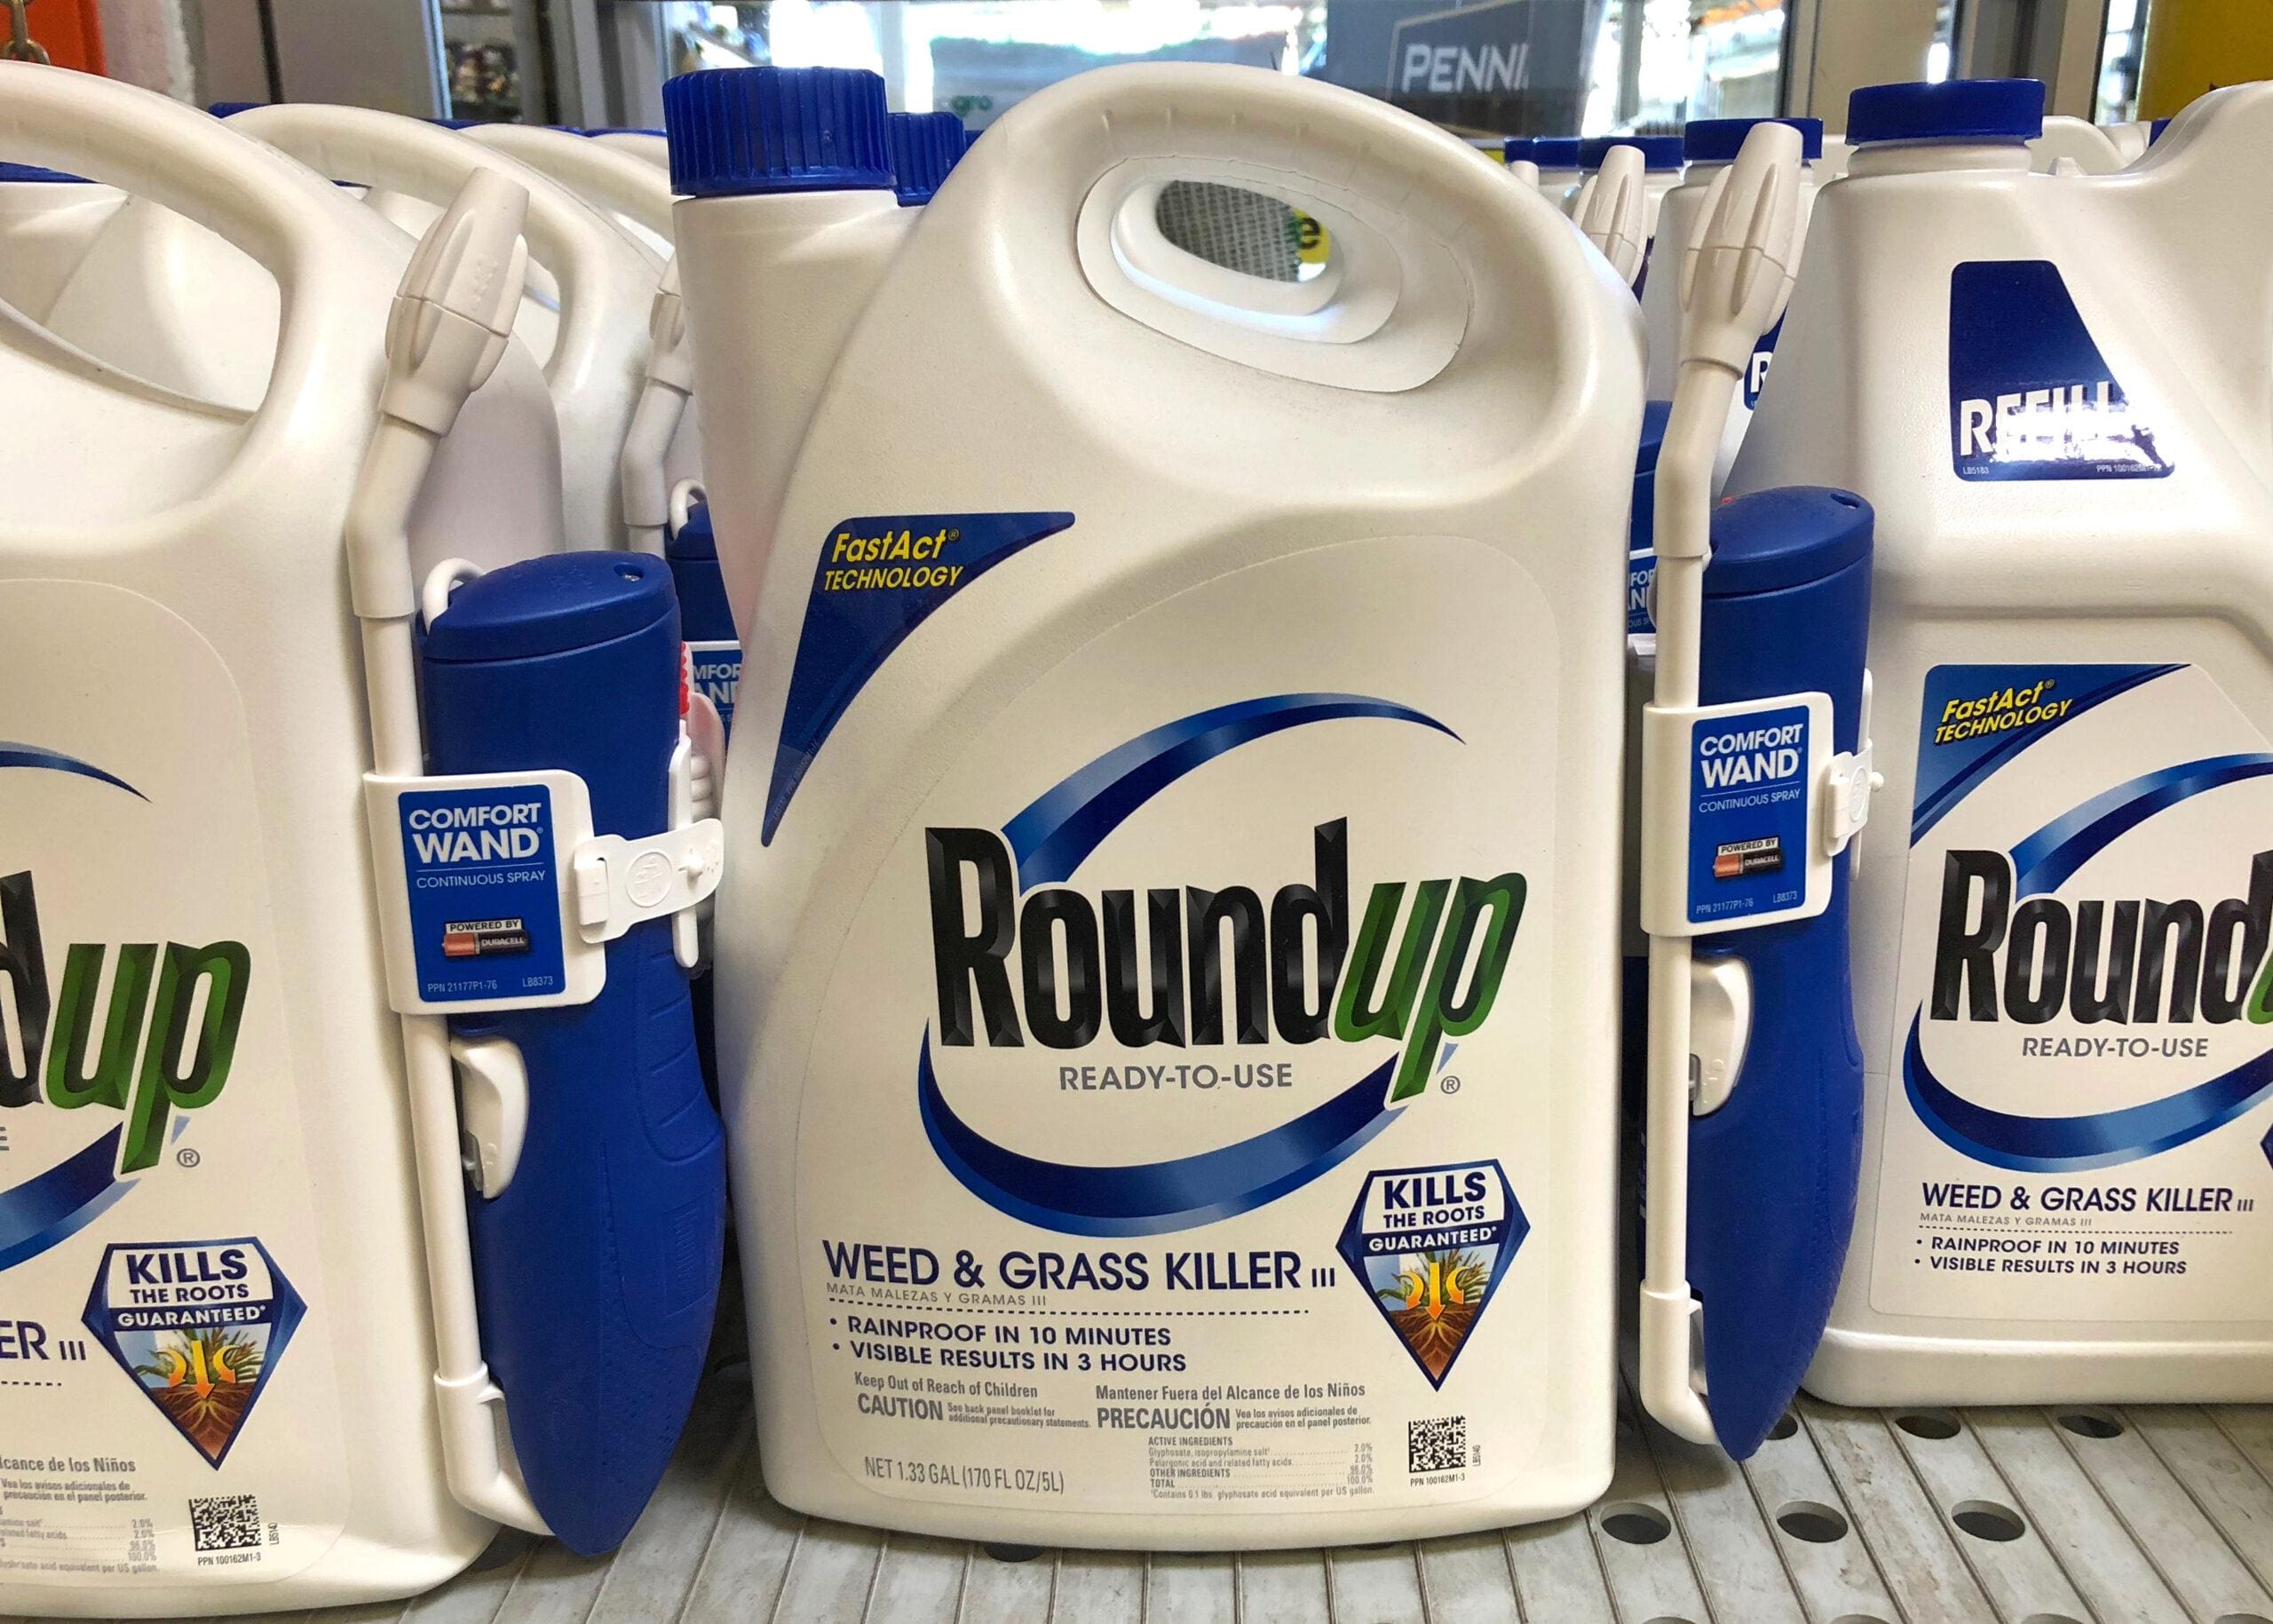 An Insight Into The Roundup Litigation Status In 2024